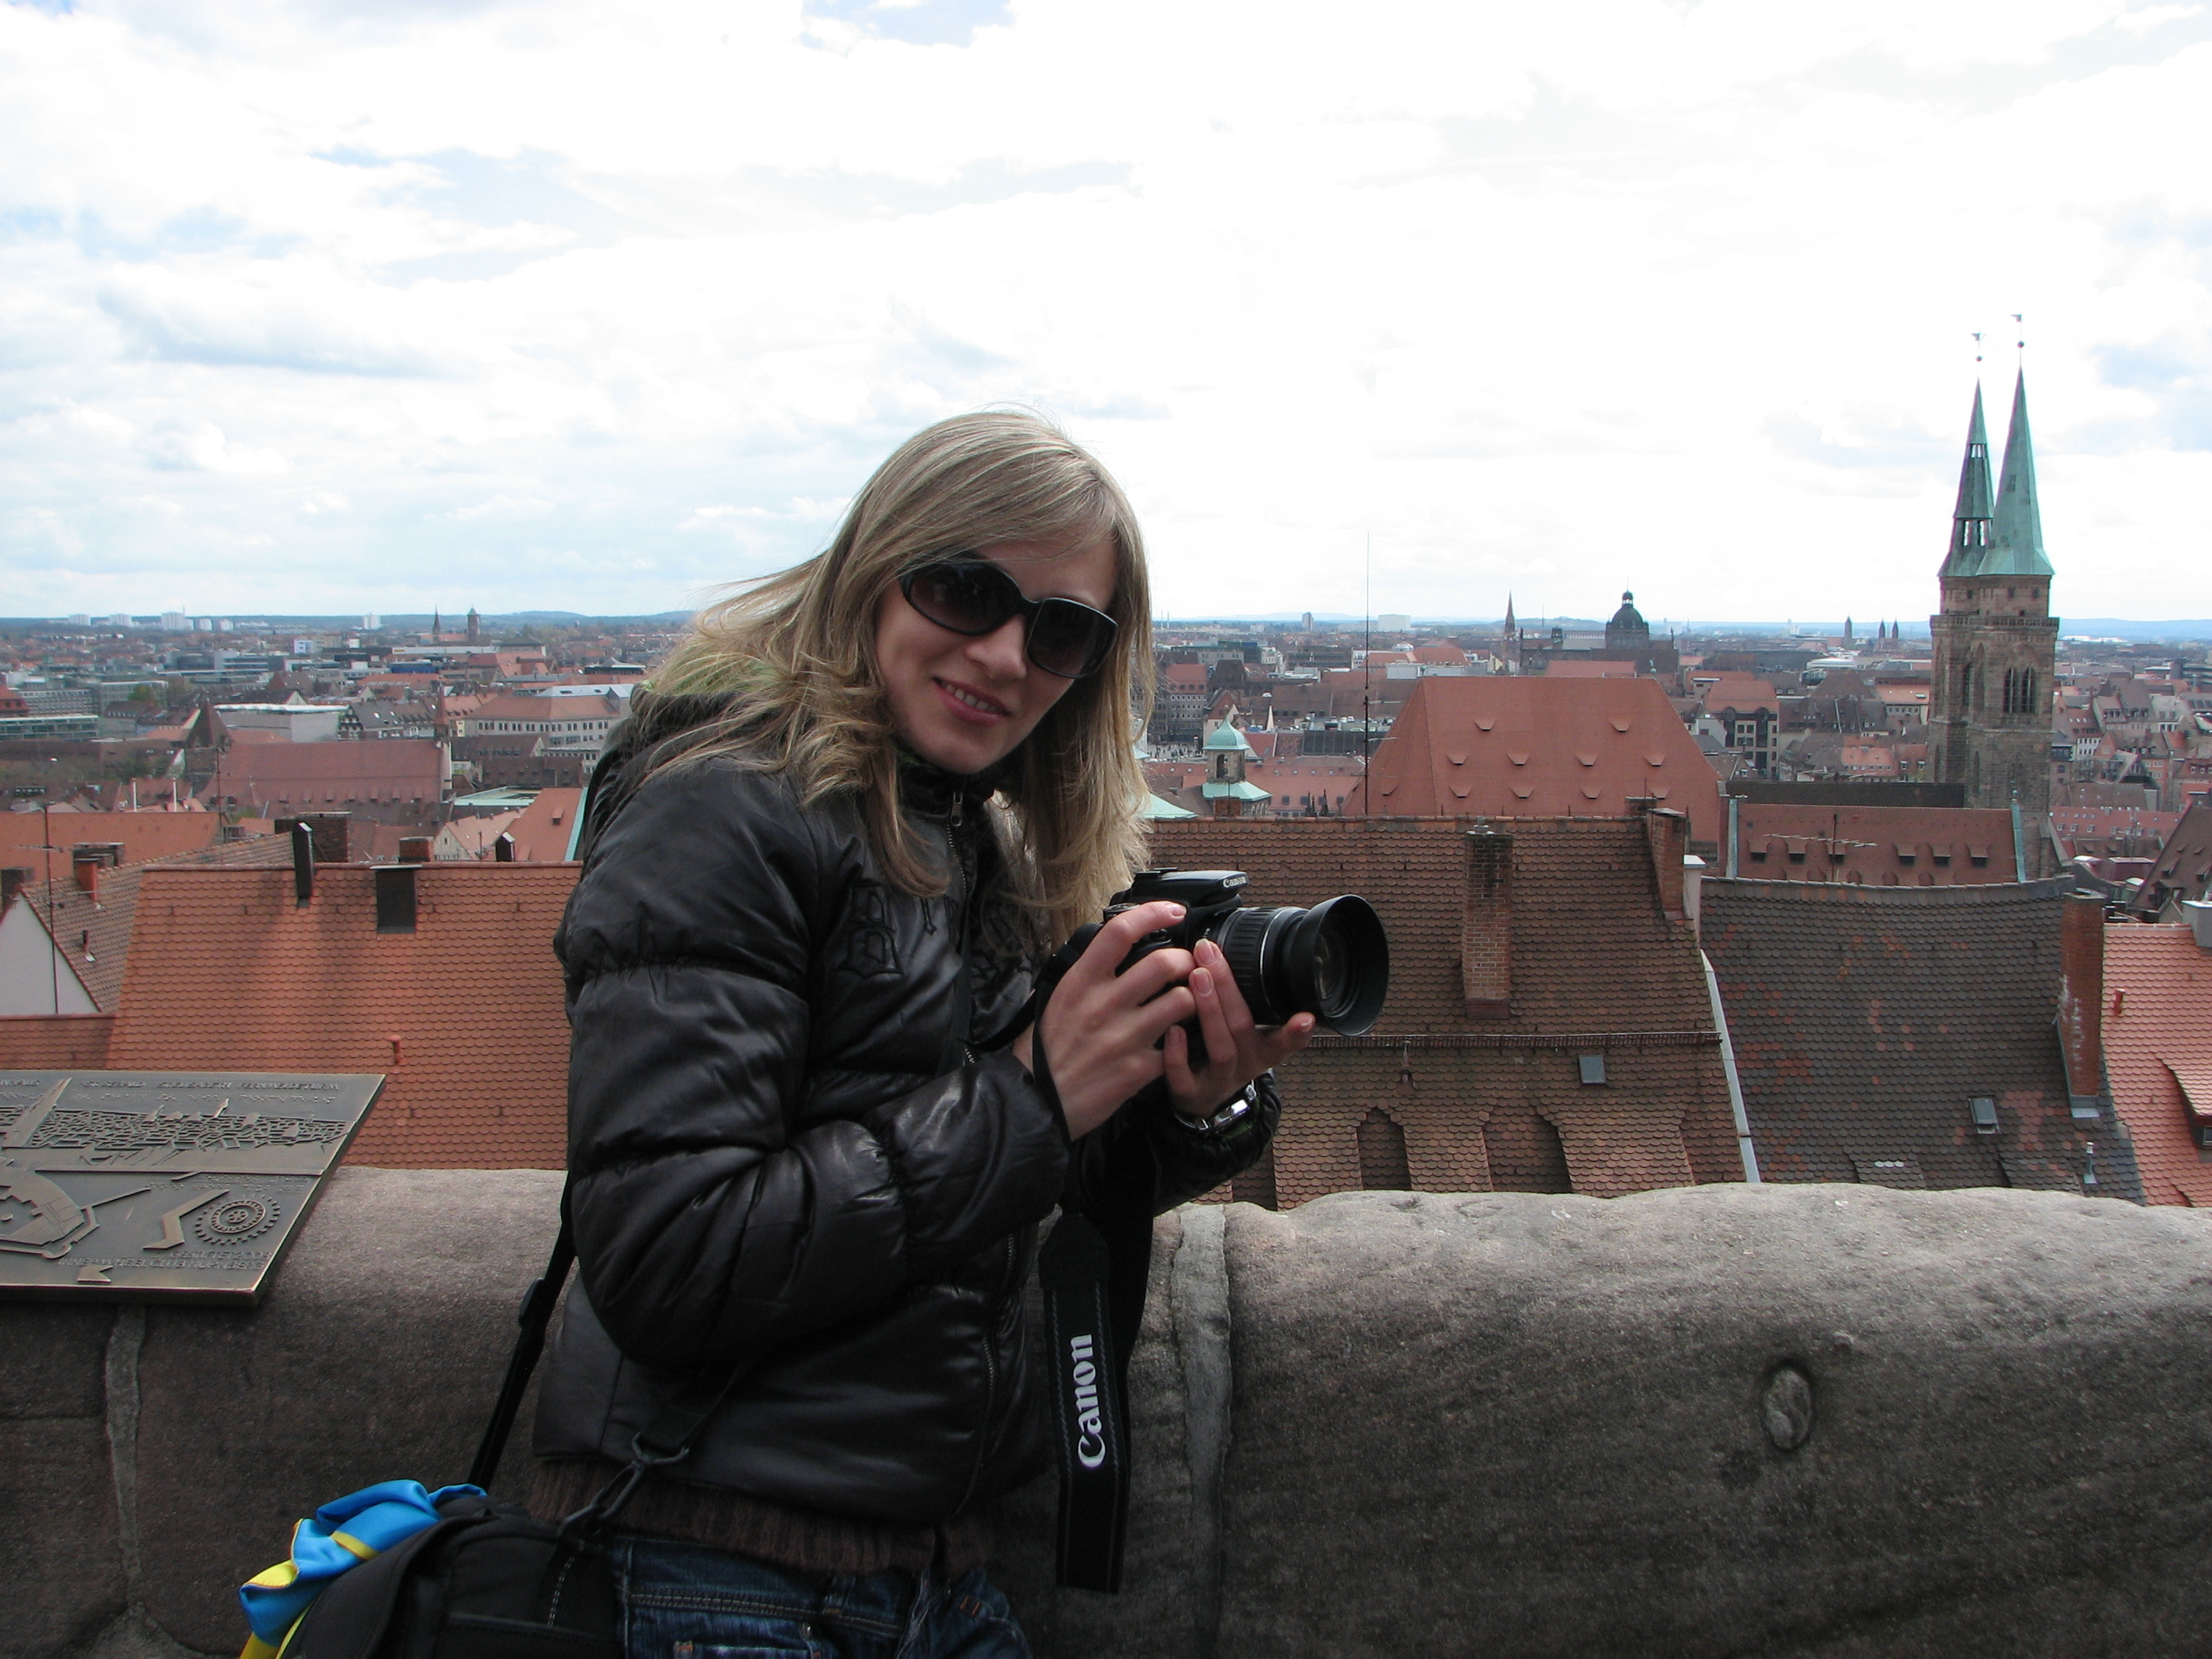 A girl with a Canon camera, Nuremberg, Germany